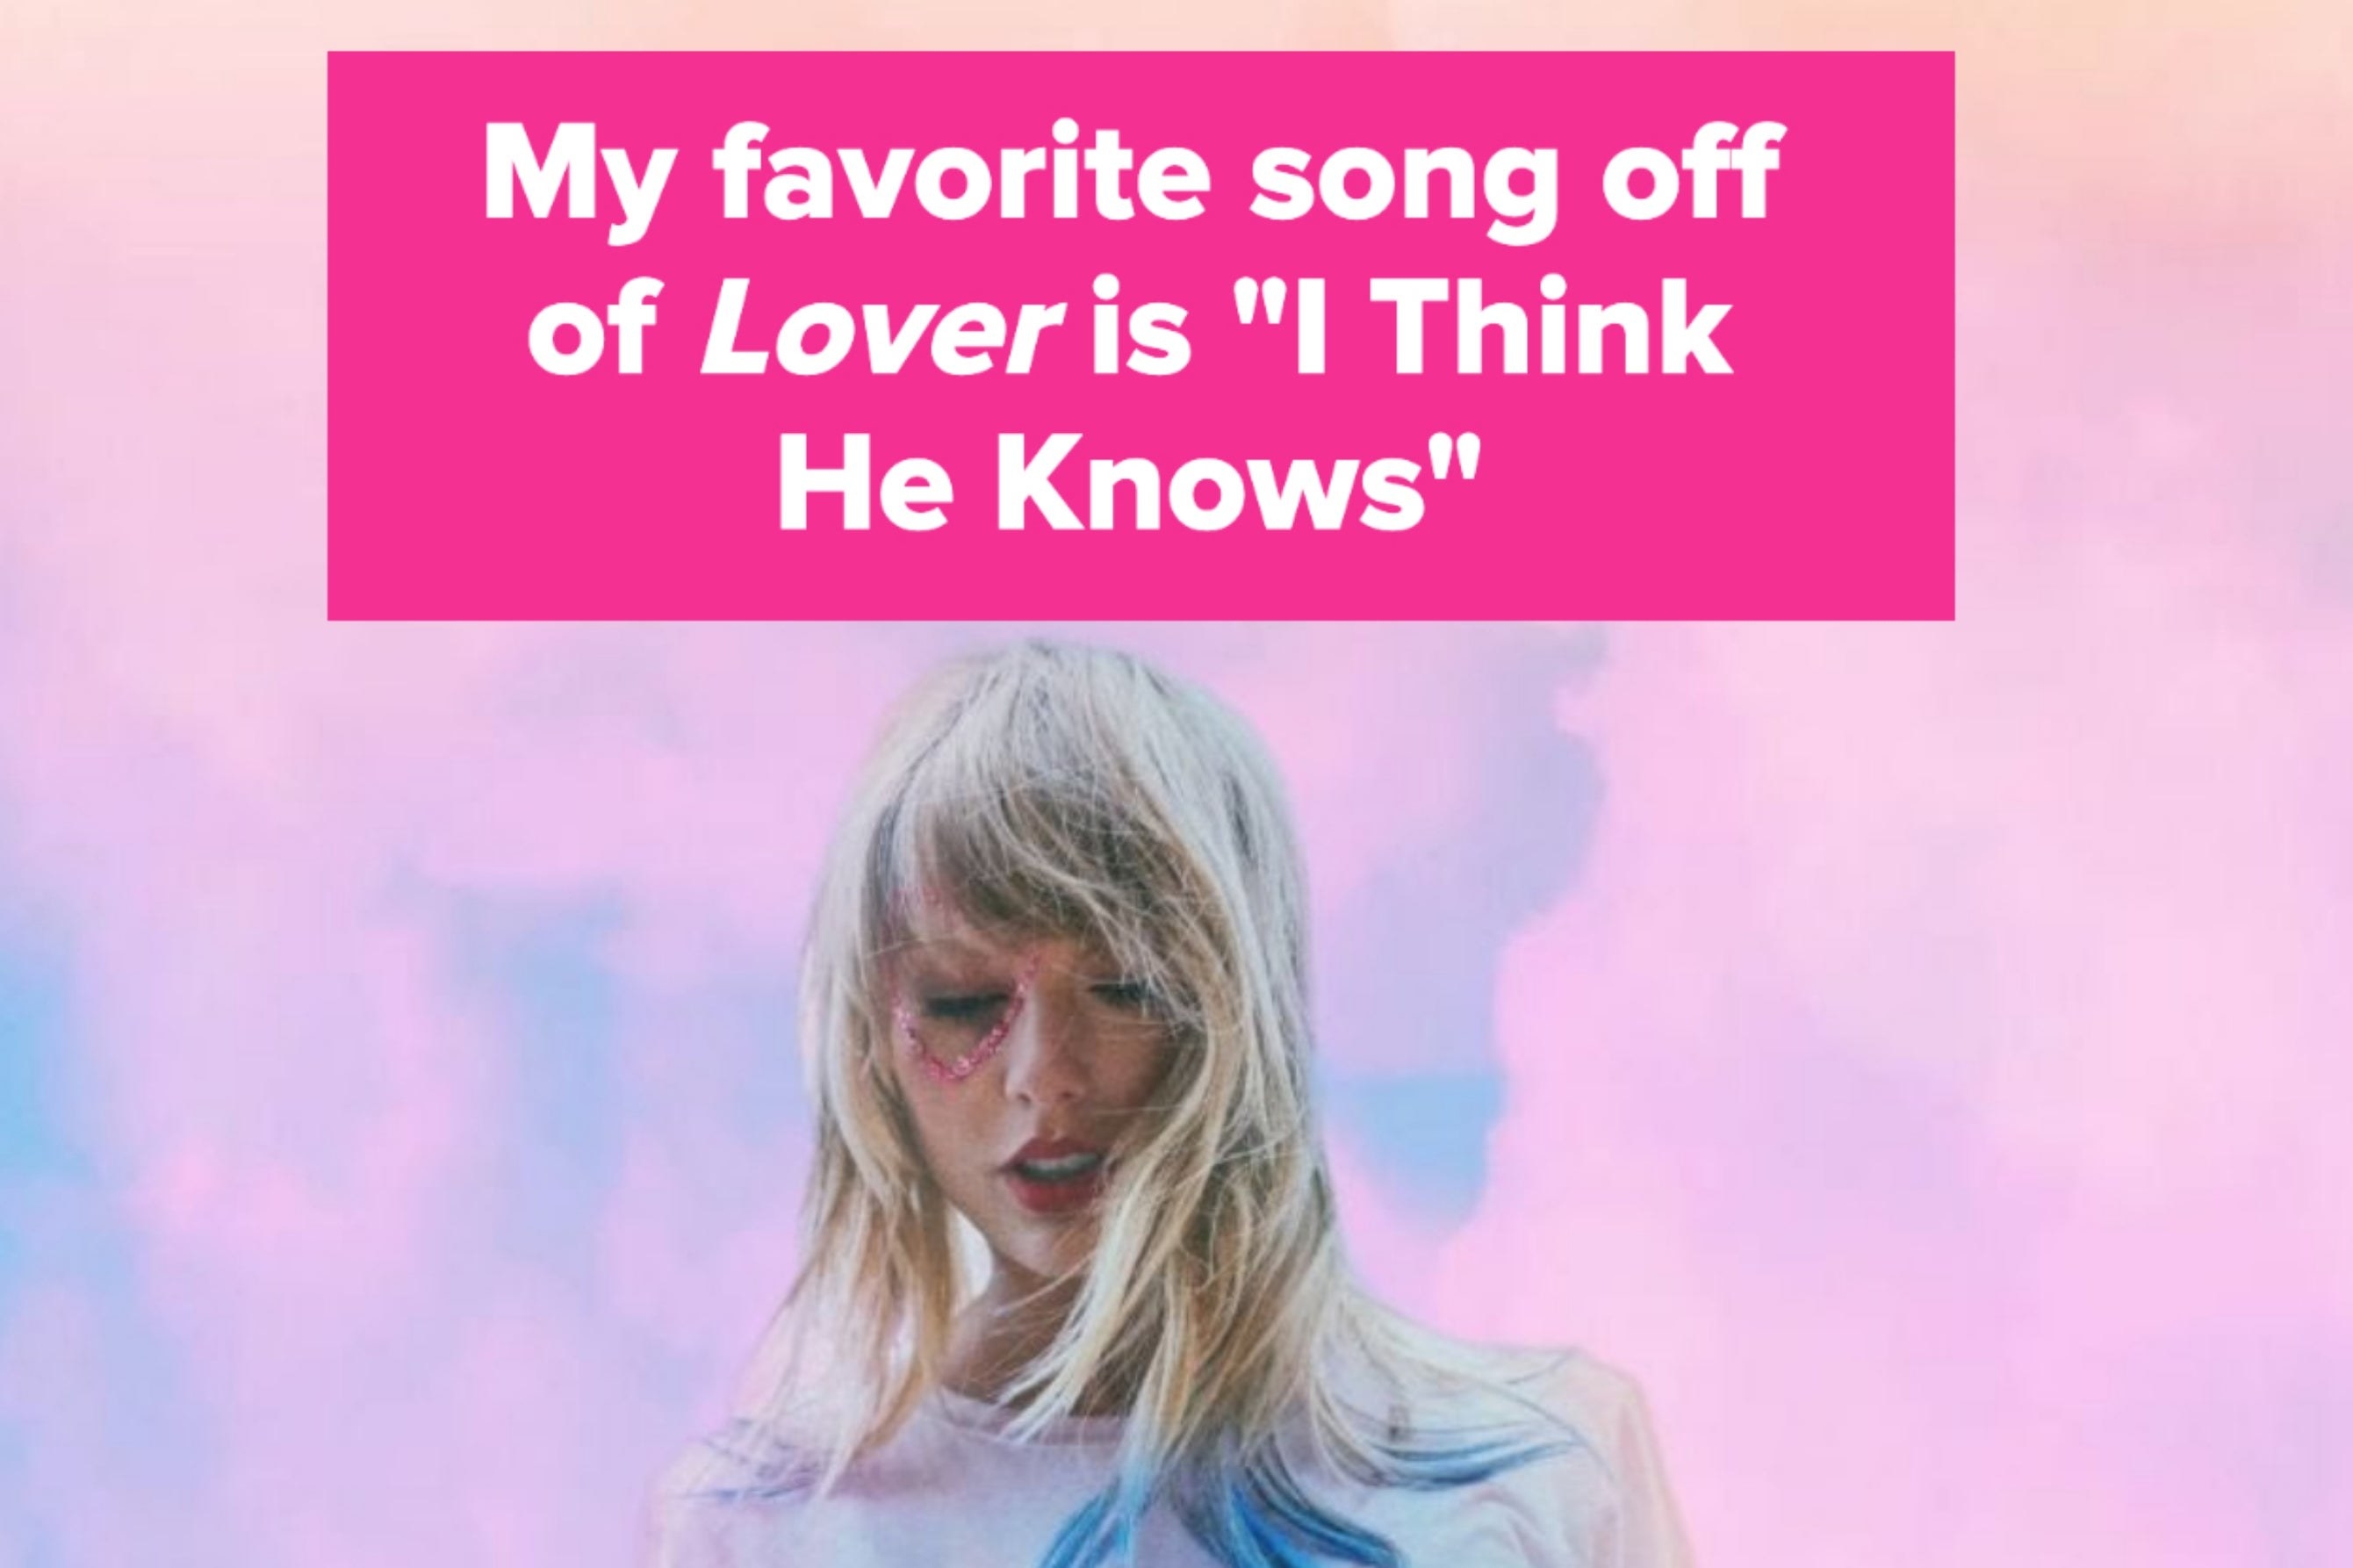 photo of the cover for &quot;Lover&quot; with the text &quot;My favorite song off of Lover is &#x27;I Think He Knows&#x27;&quot;